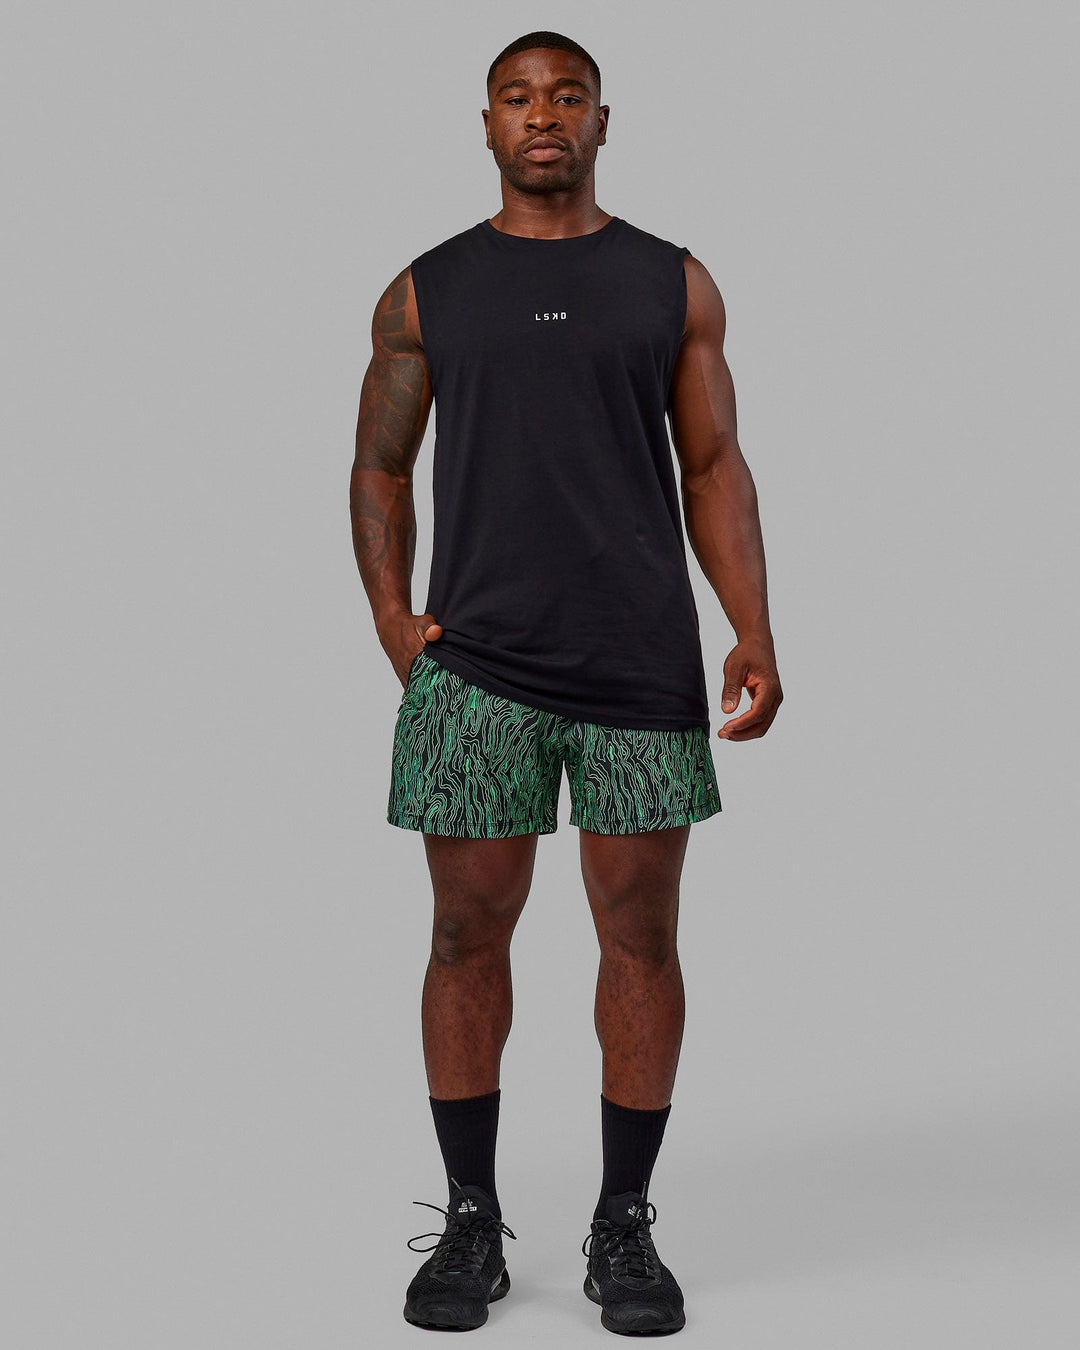 Man wearing Rep 5" Performance Shorts - Topographic Black-Lime